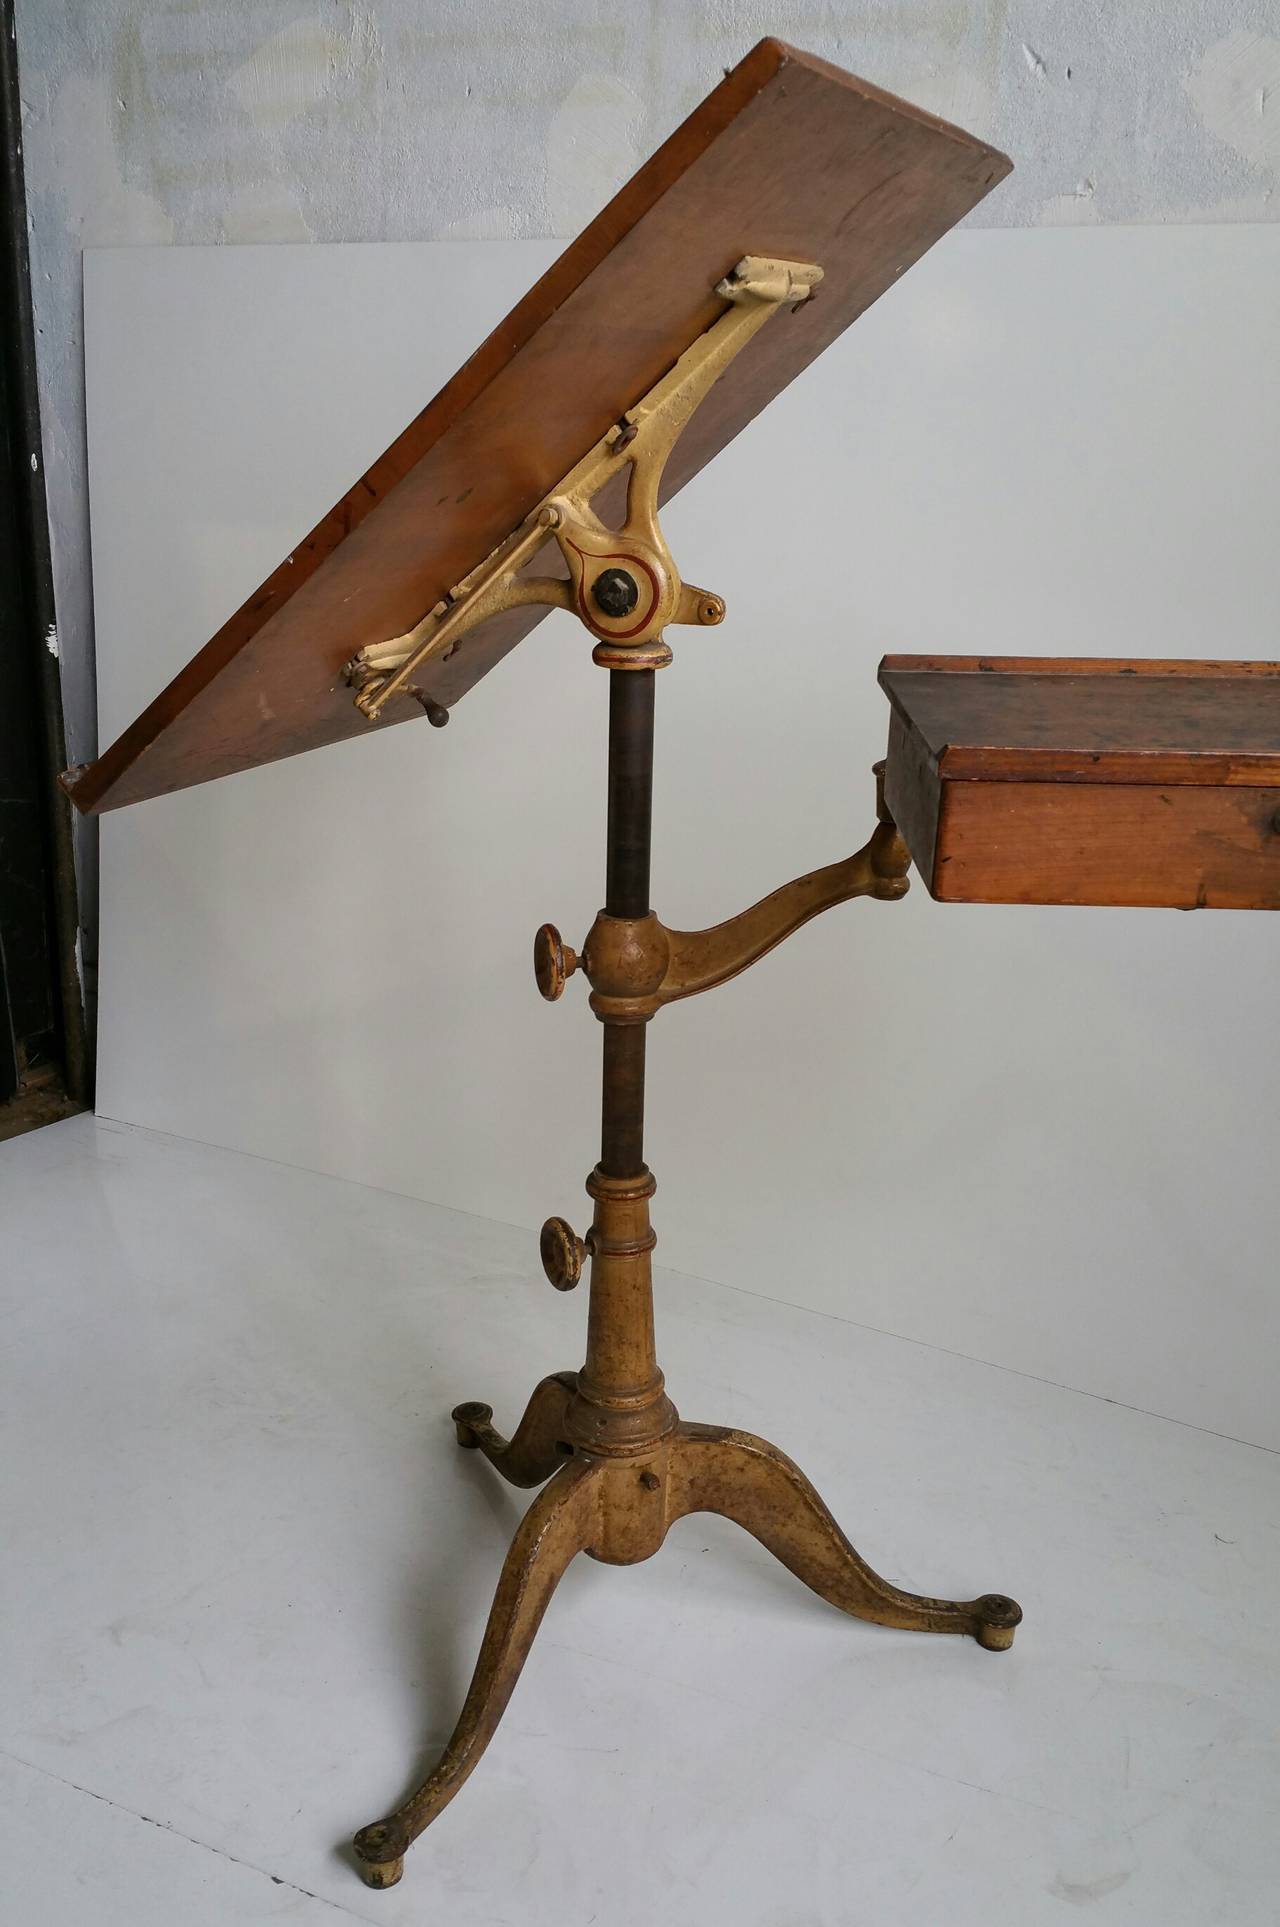 Turn of the century fully adjustable drafting table, top measures 27 x 21, heavy cast iron base, beautiful paint and surface, Retains seldom seen swivel drawer. Measuring 15 x 11. Beautifully proportioned.